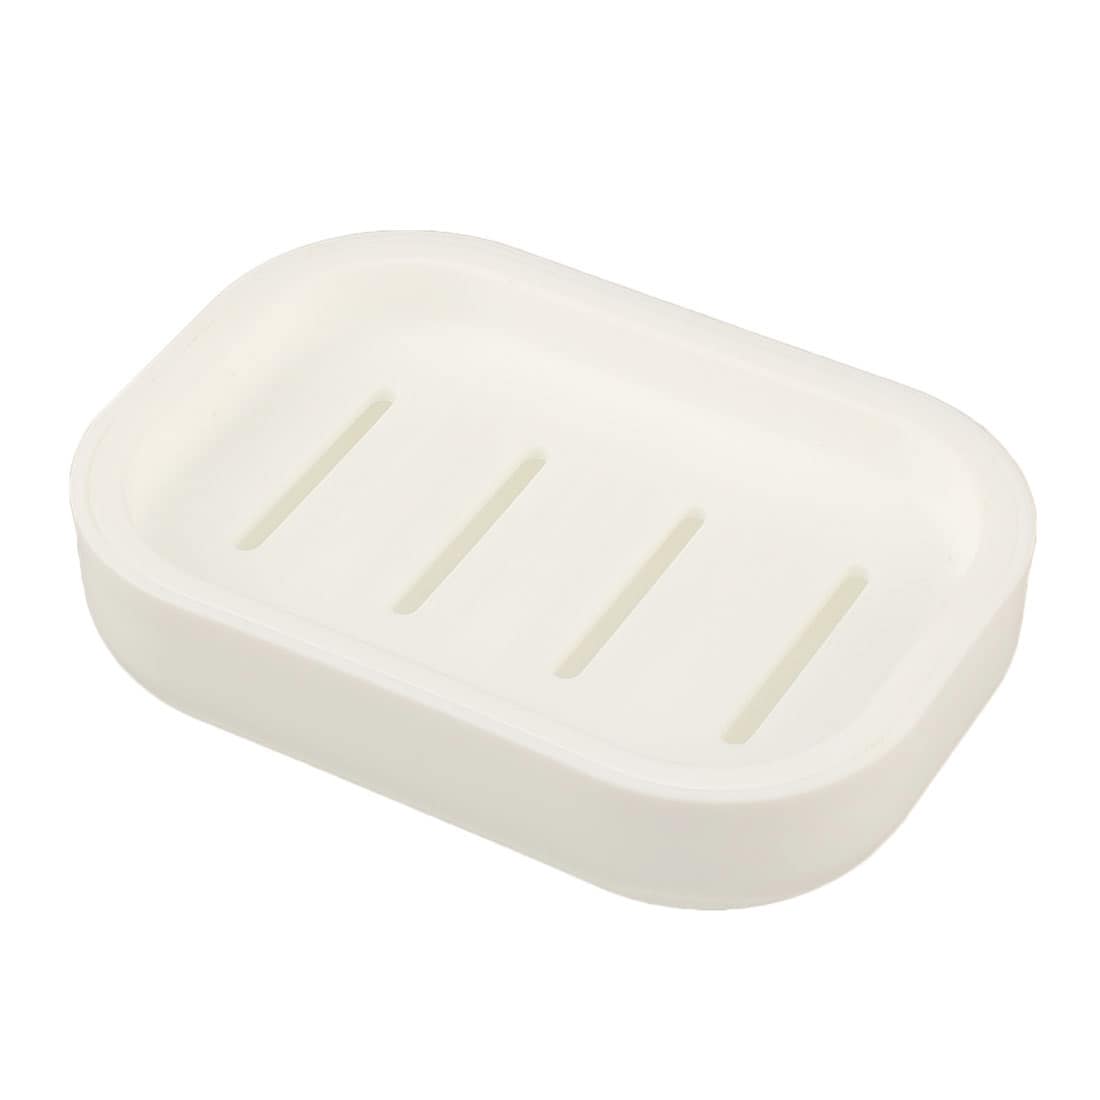 https://ak1.ostkcdn.com/images/products/is/images/direct/e34c840acd066faf86871895c76a758b6249ab28/Home-Bathroom-Plastic-Rectangle-Shower-Soap-Holder-Draining-Box-Case-Dish-White.jpg